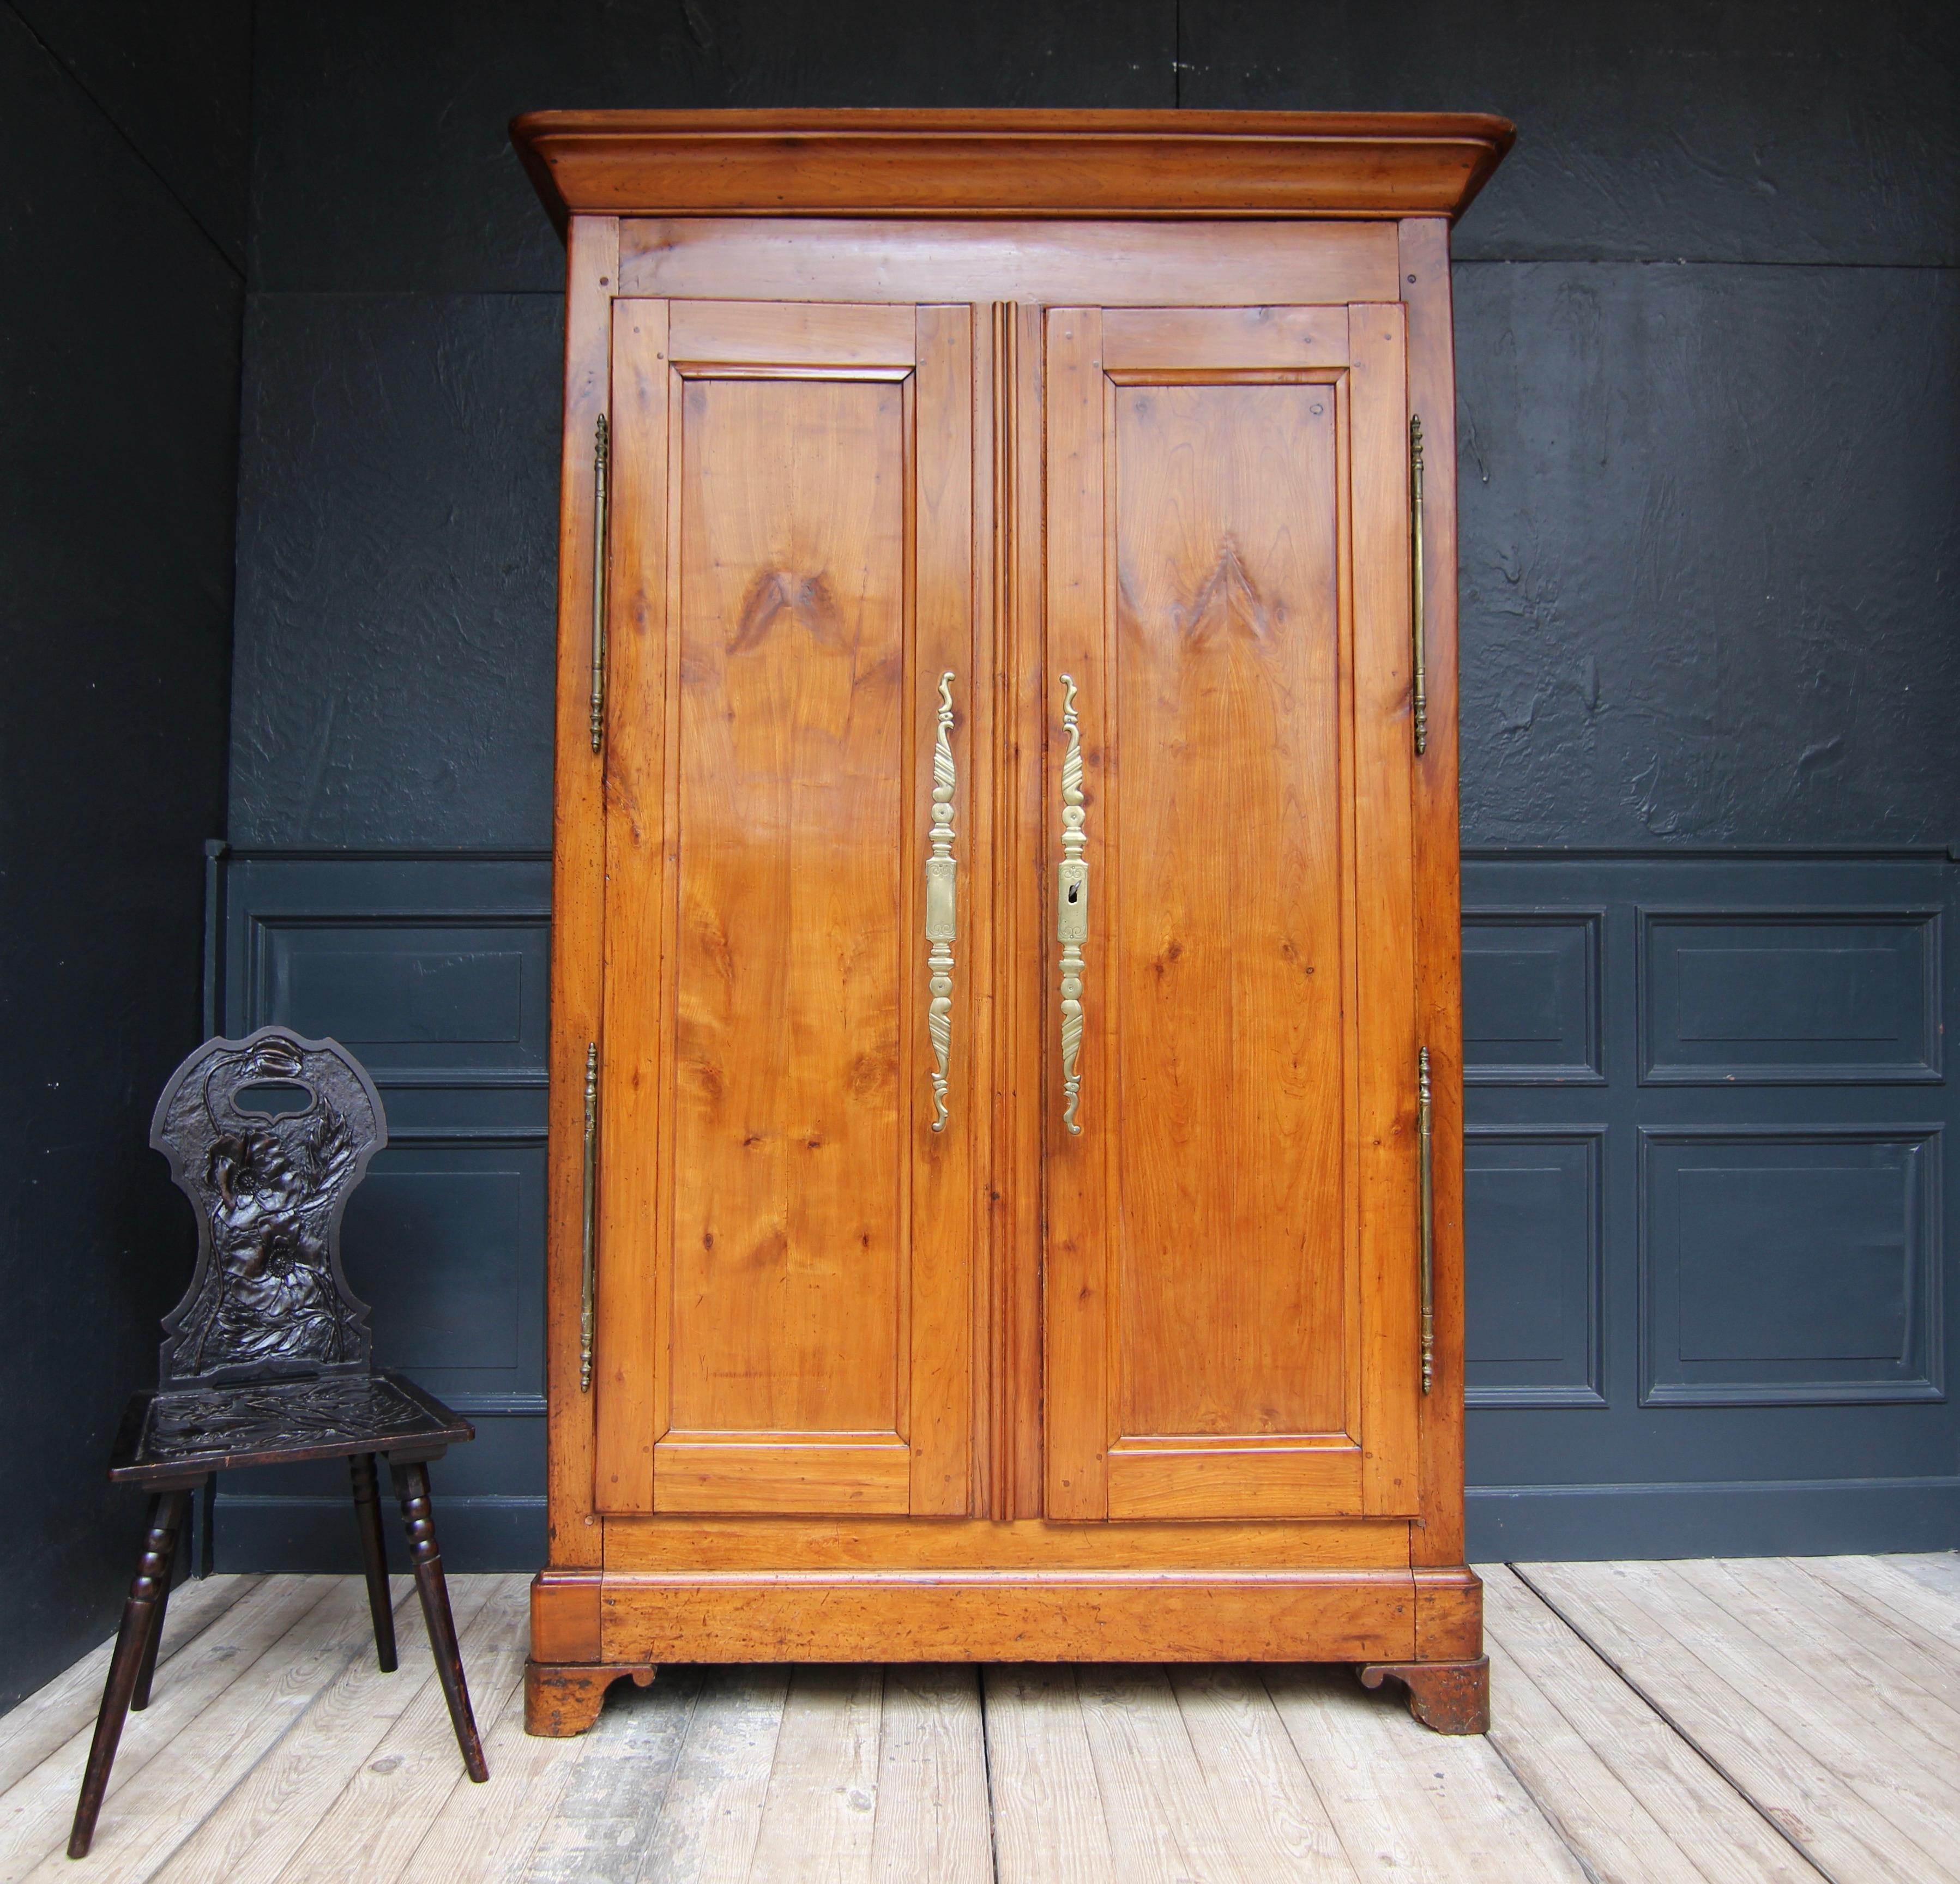 A late 18th century French cabinet solidly made of cherry wood.

Simple two-door body with coffered sides and profiled, slightly rounded cornice. Two doors in frame construction hung on large hand-forged brass fittings on the outside.

Fitted